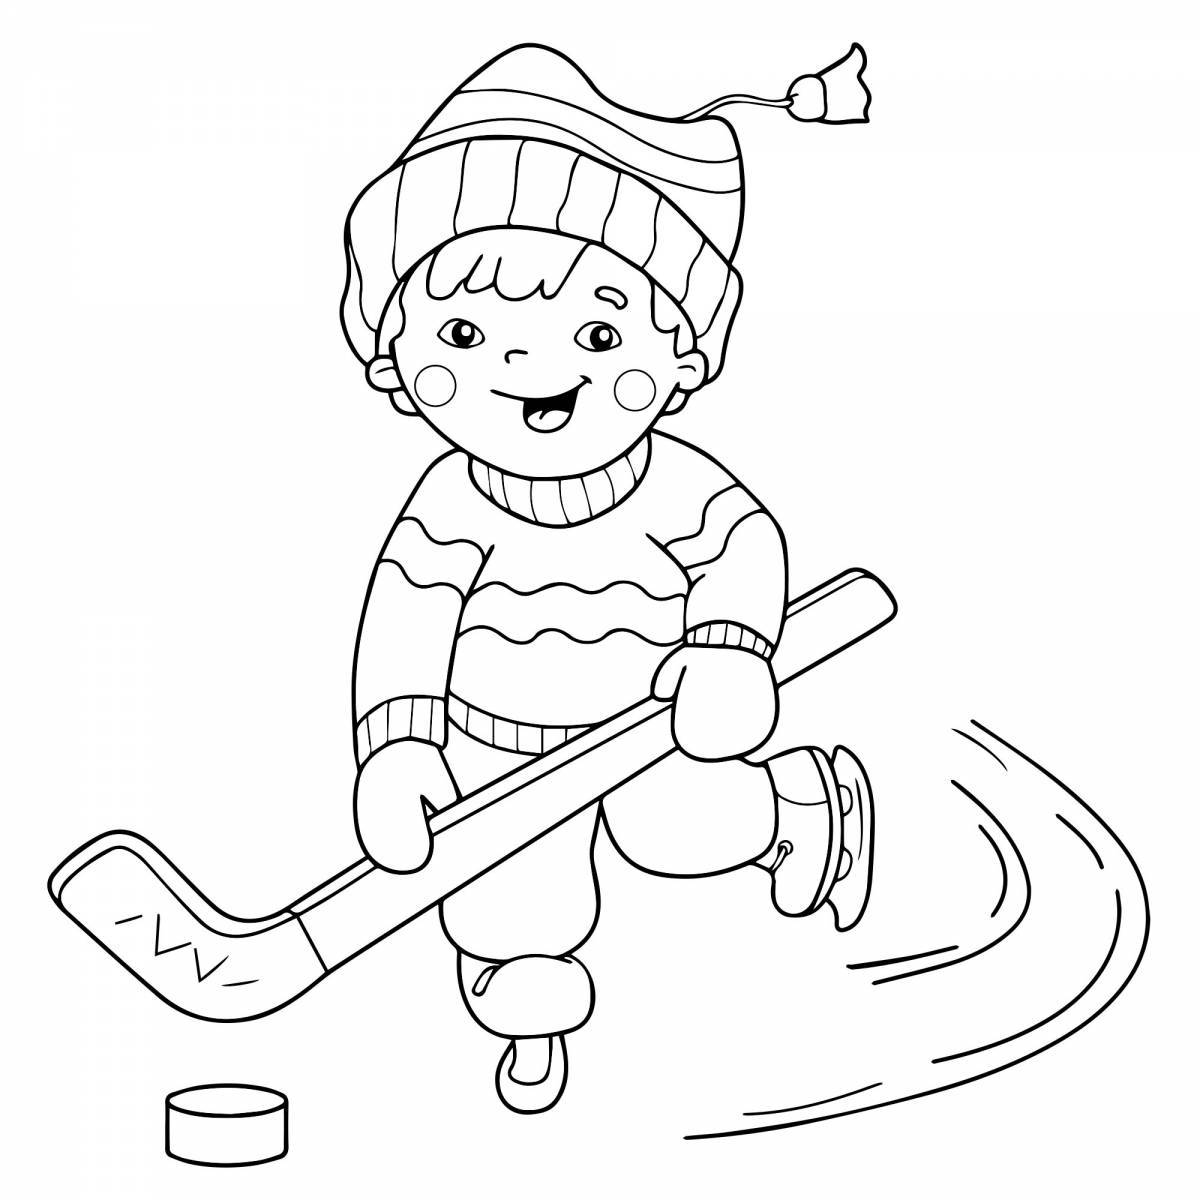 Amazing coloring book for children 3-4 years old winter sports